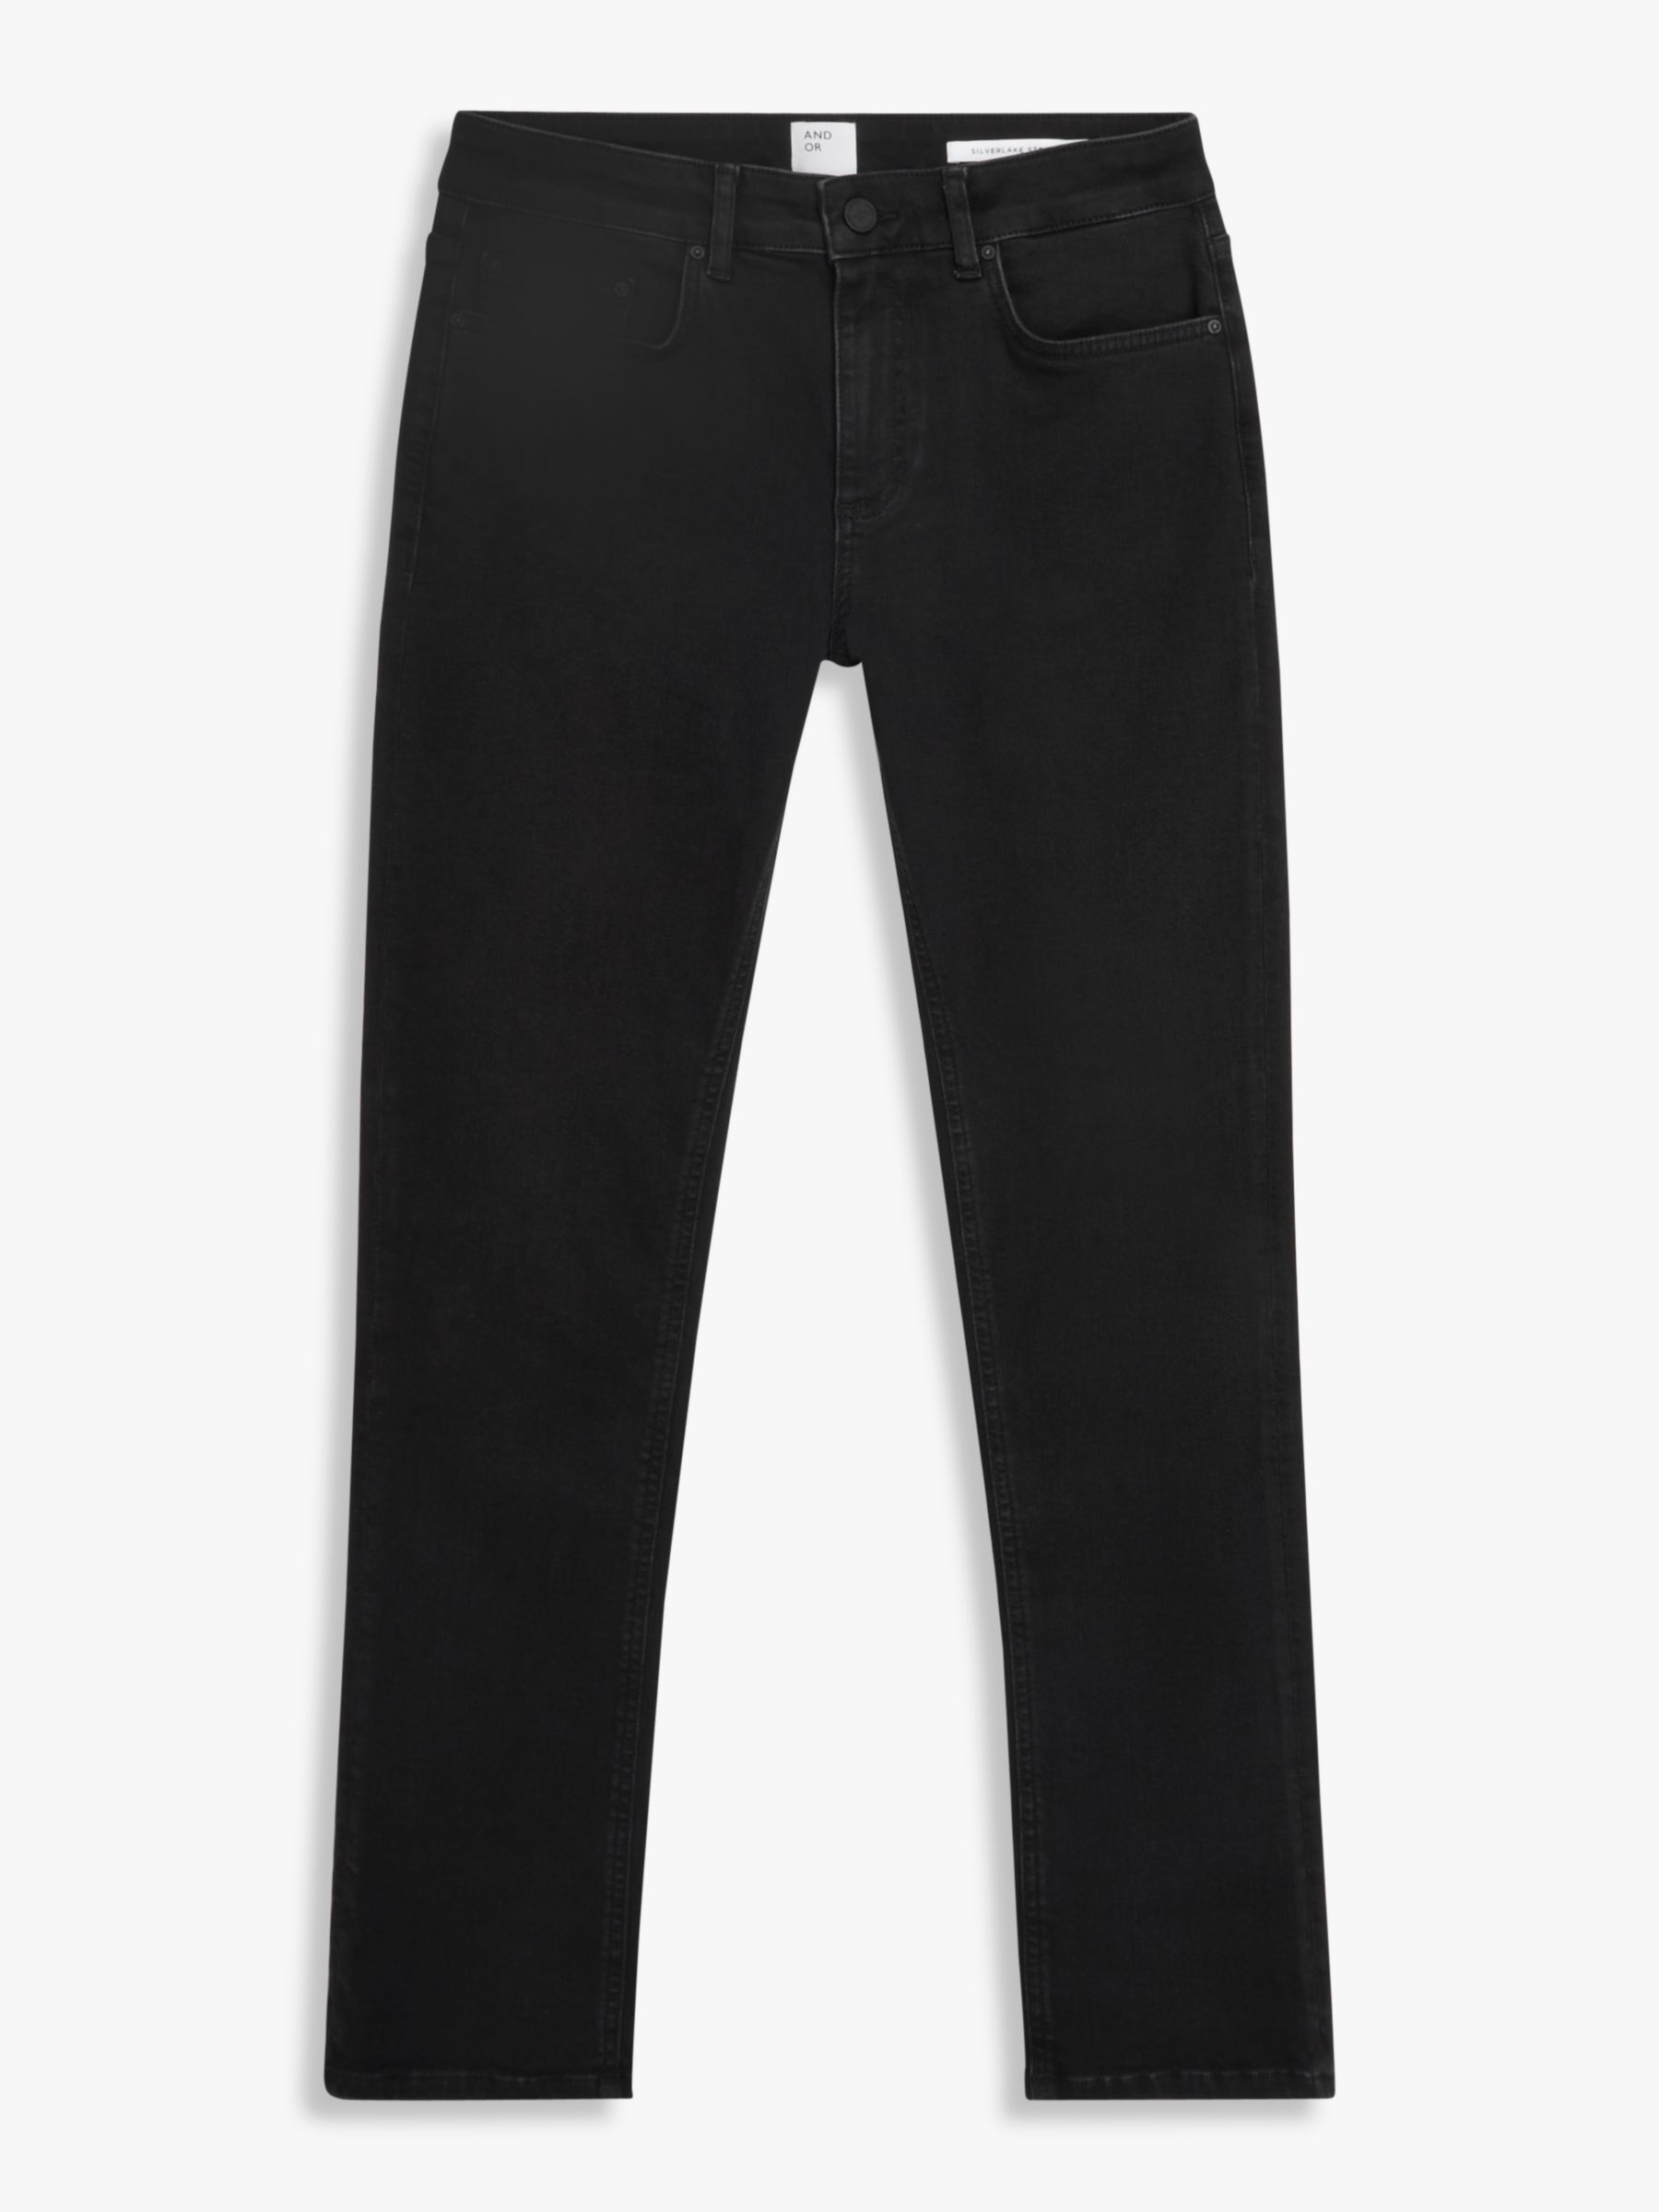 AND/OR Silverlake Straight Cut Jeans, Washed Black at John Lewis & Partners